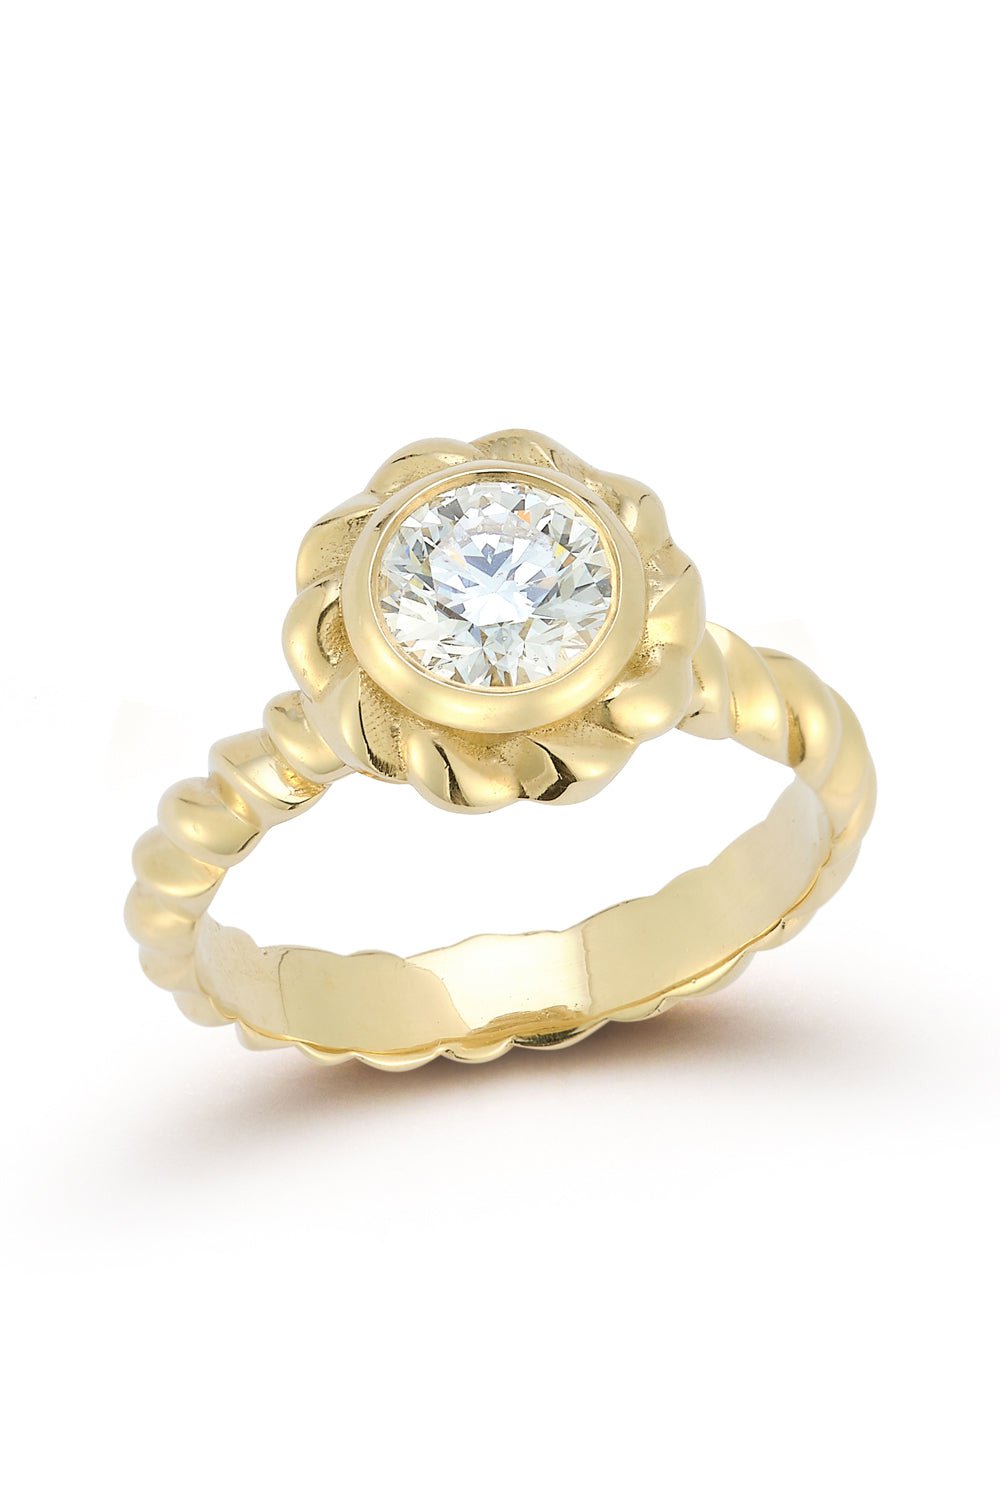 COMMON RITE SUPPLY-Opposites Attract Ring-YELLOW GOLD